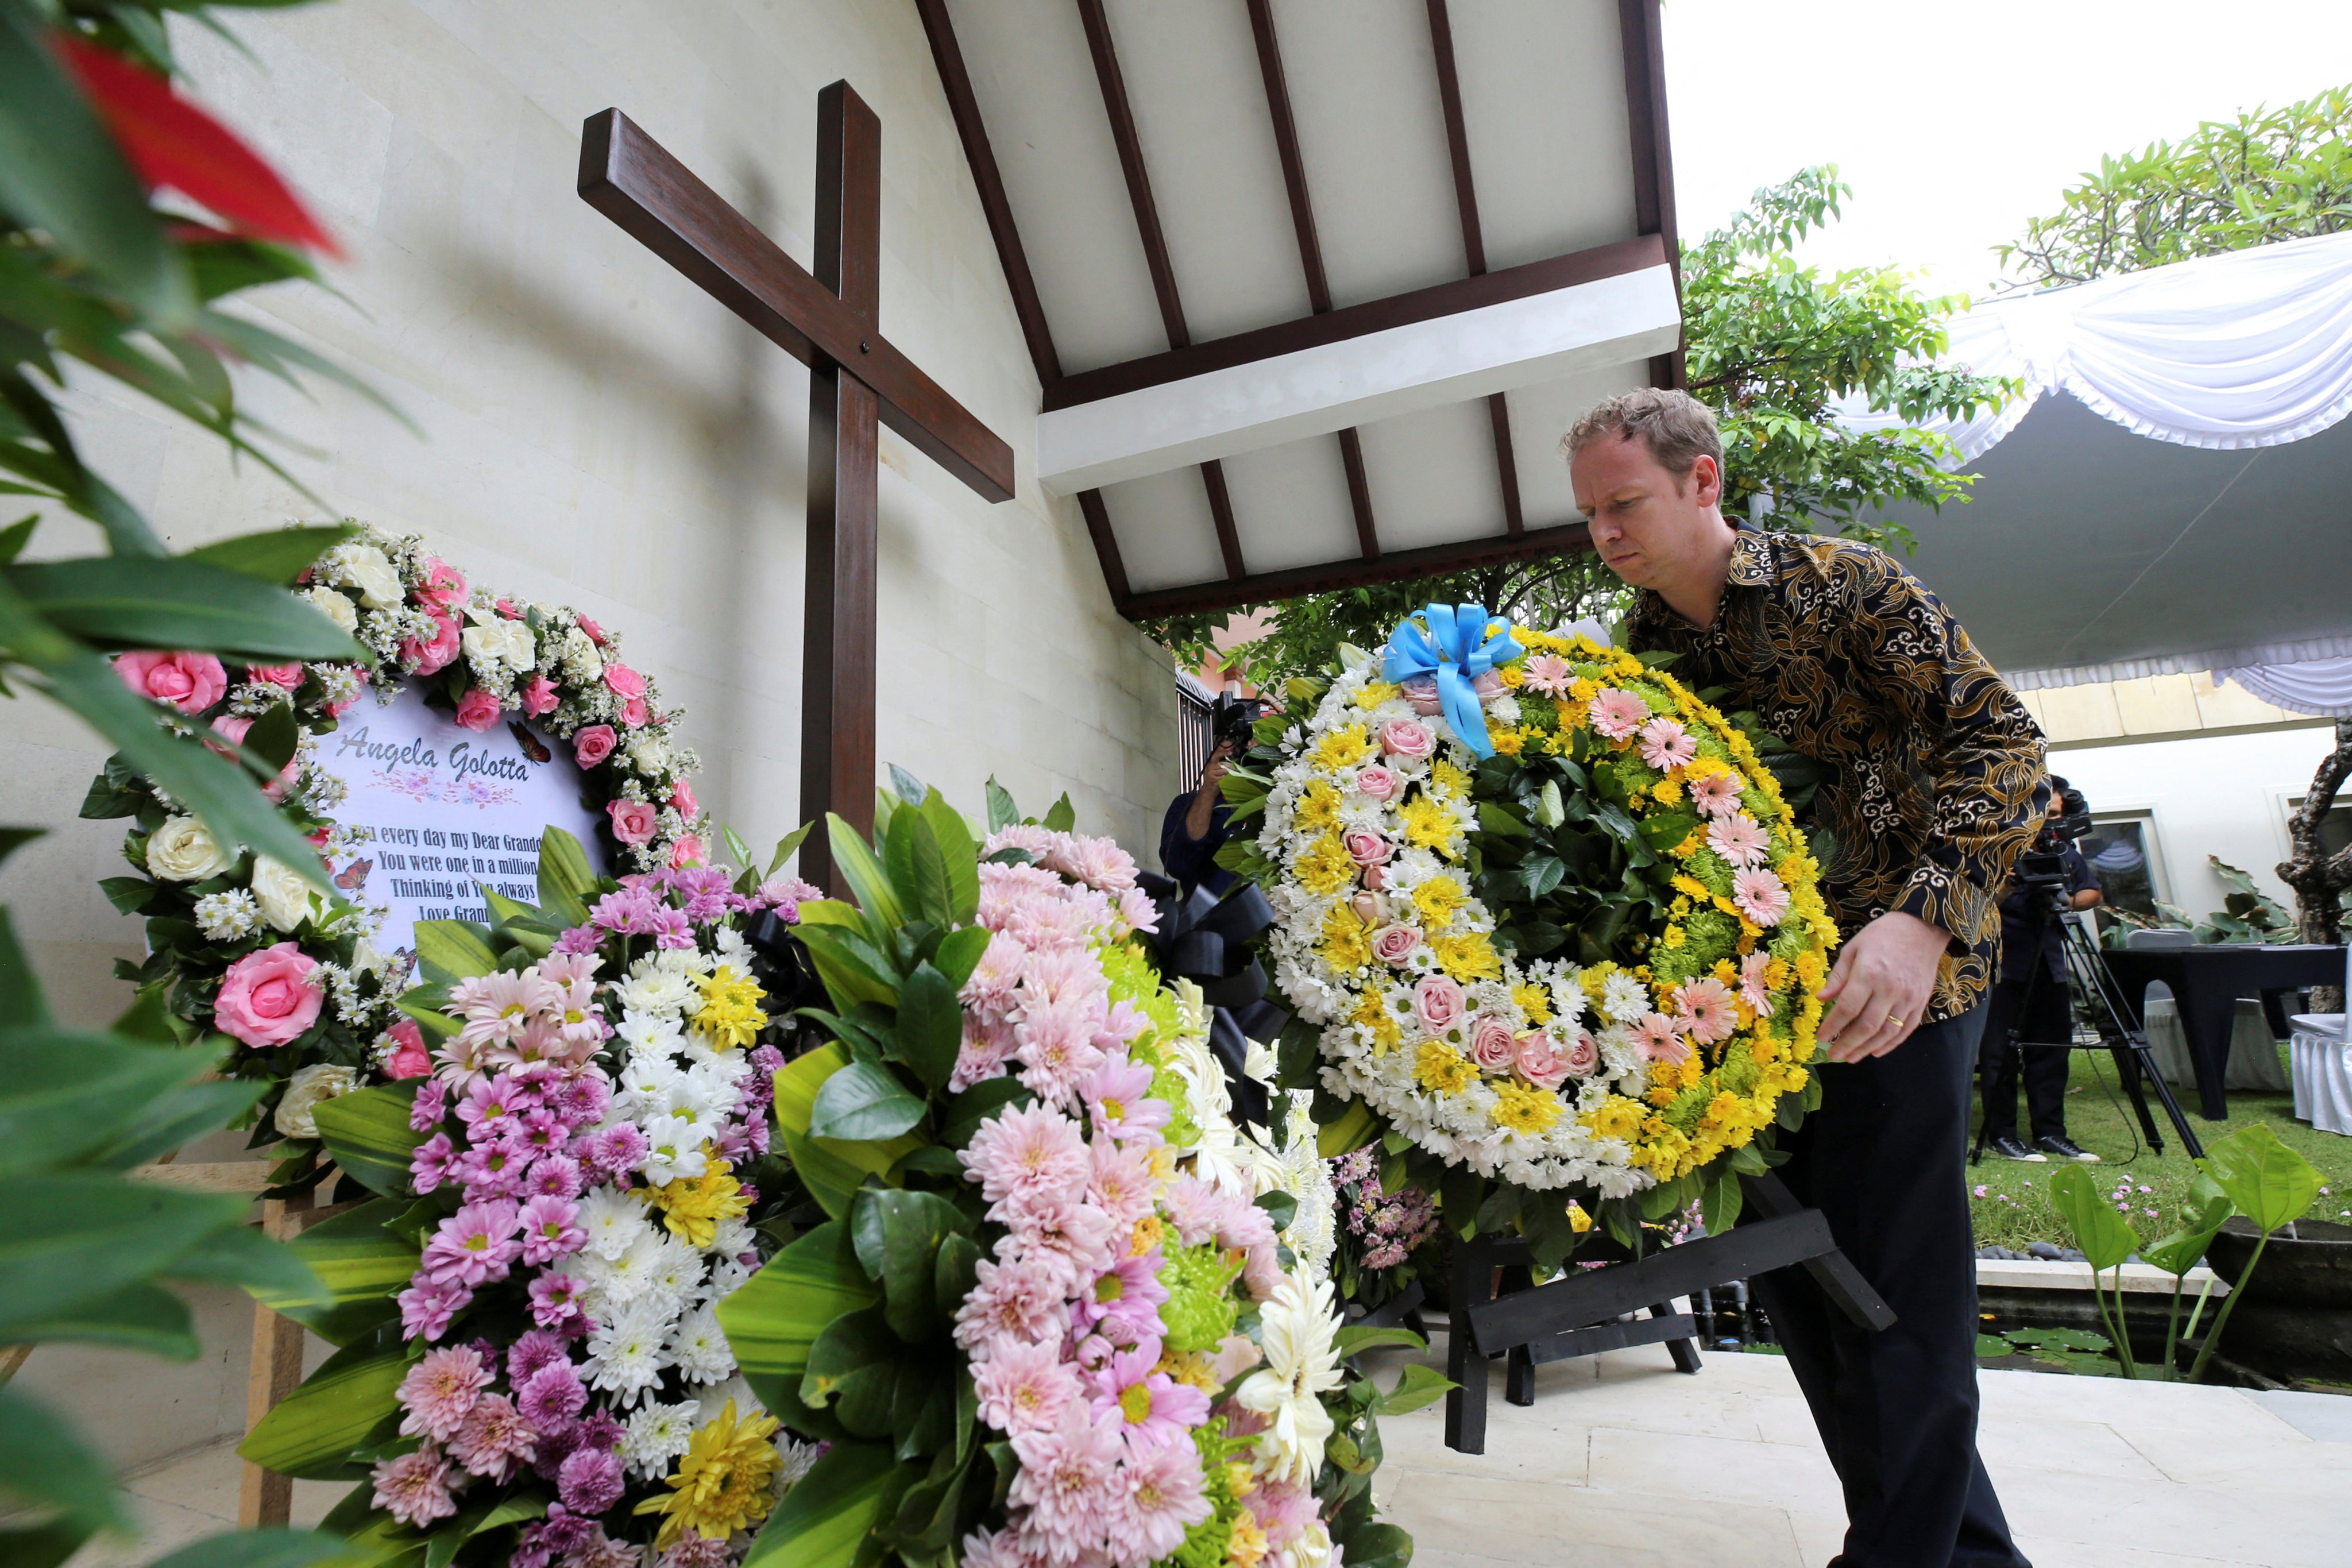 A victim’s relative lays a wreath during the commemoration of the 20th anniversary of the Bali bombing that killed 202 people, including 88 Australians, at the Australian Consulate in Denpasar, Bali, Indonesia, on October 12, 2022. Photo: Pool via Reuters